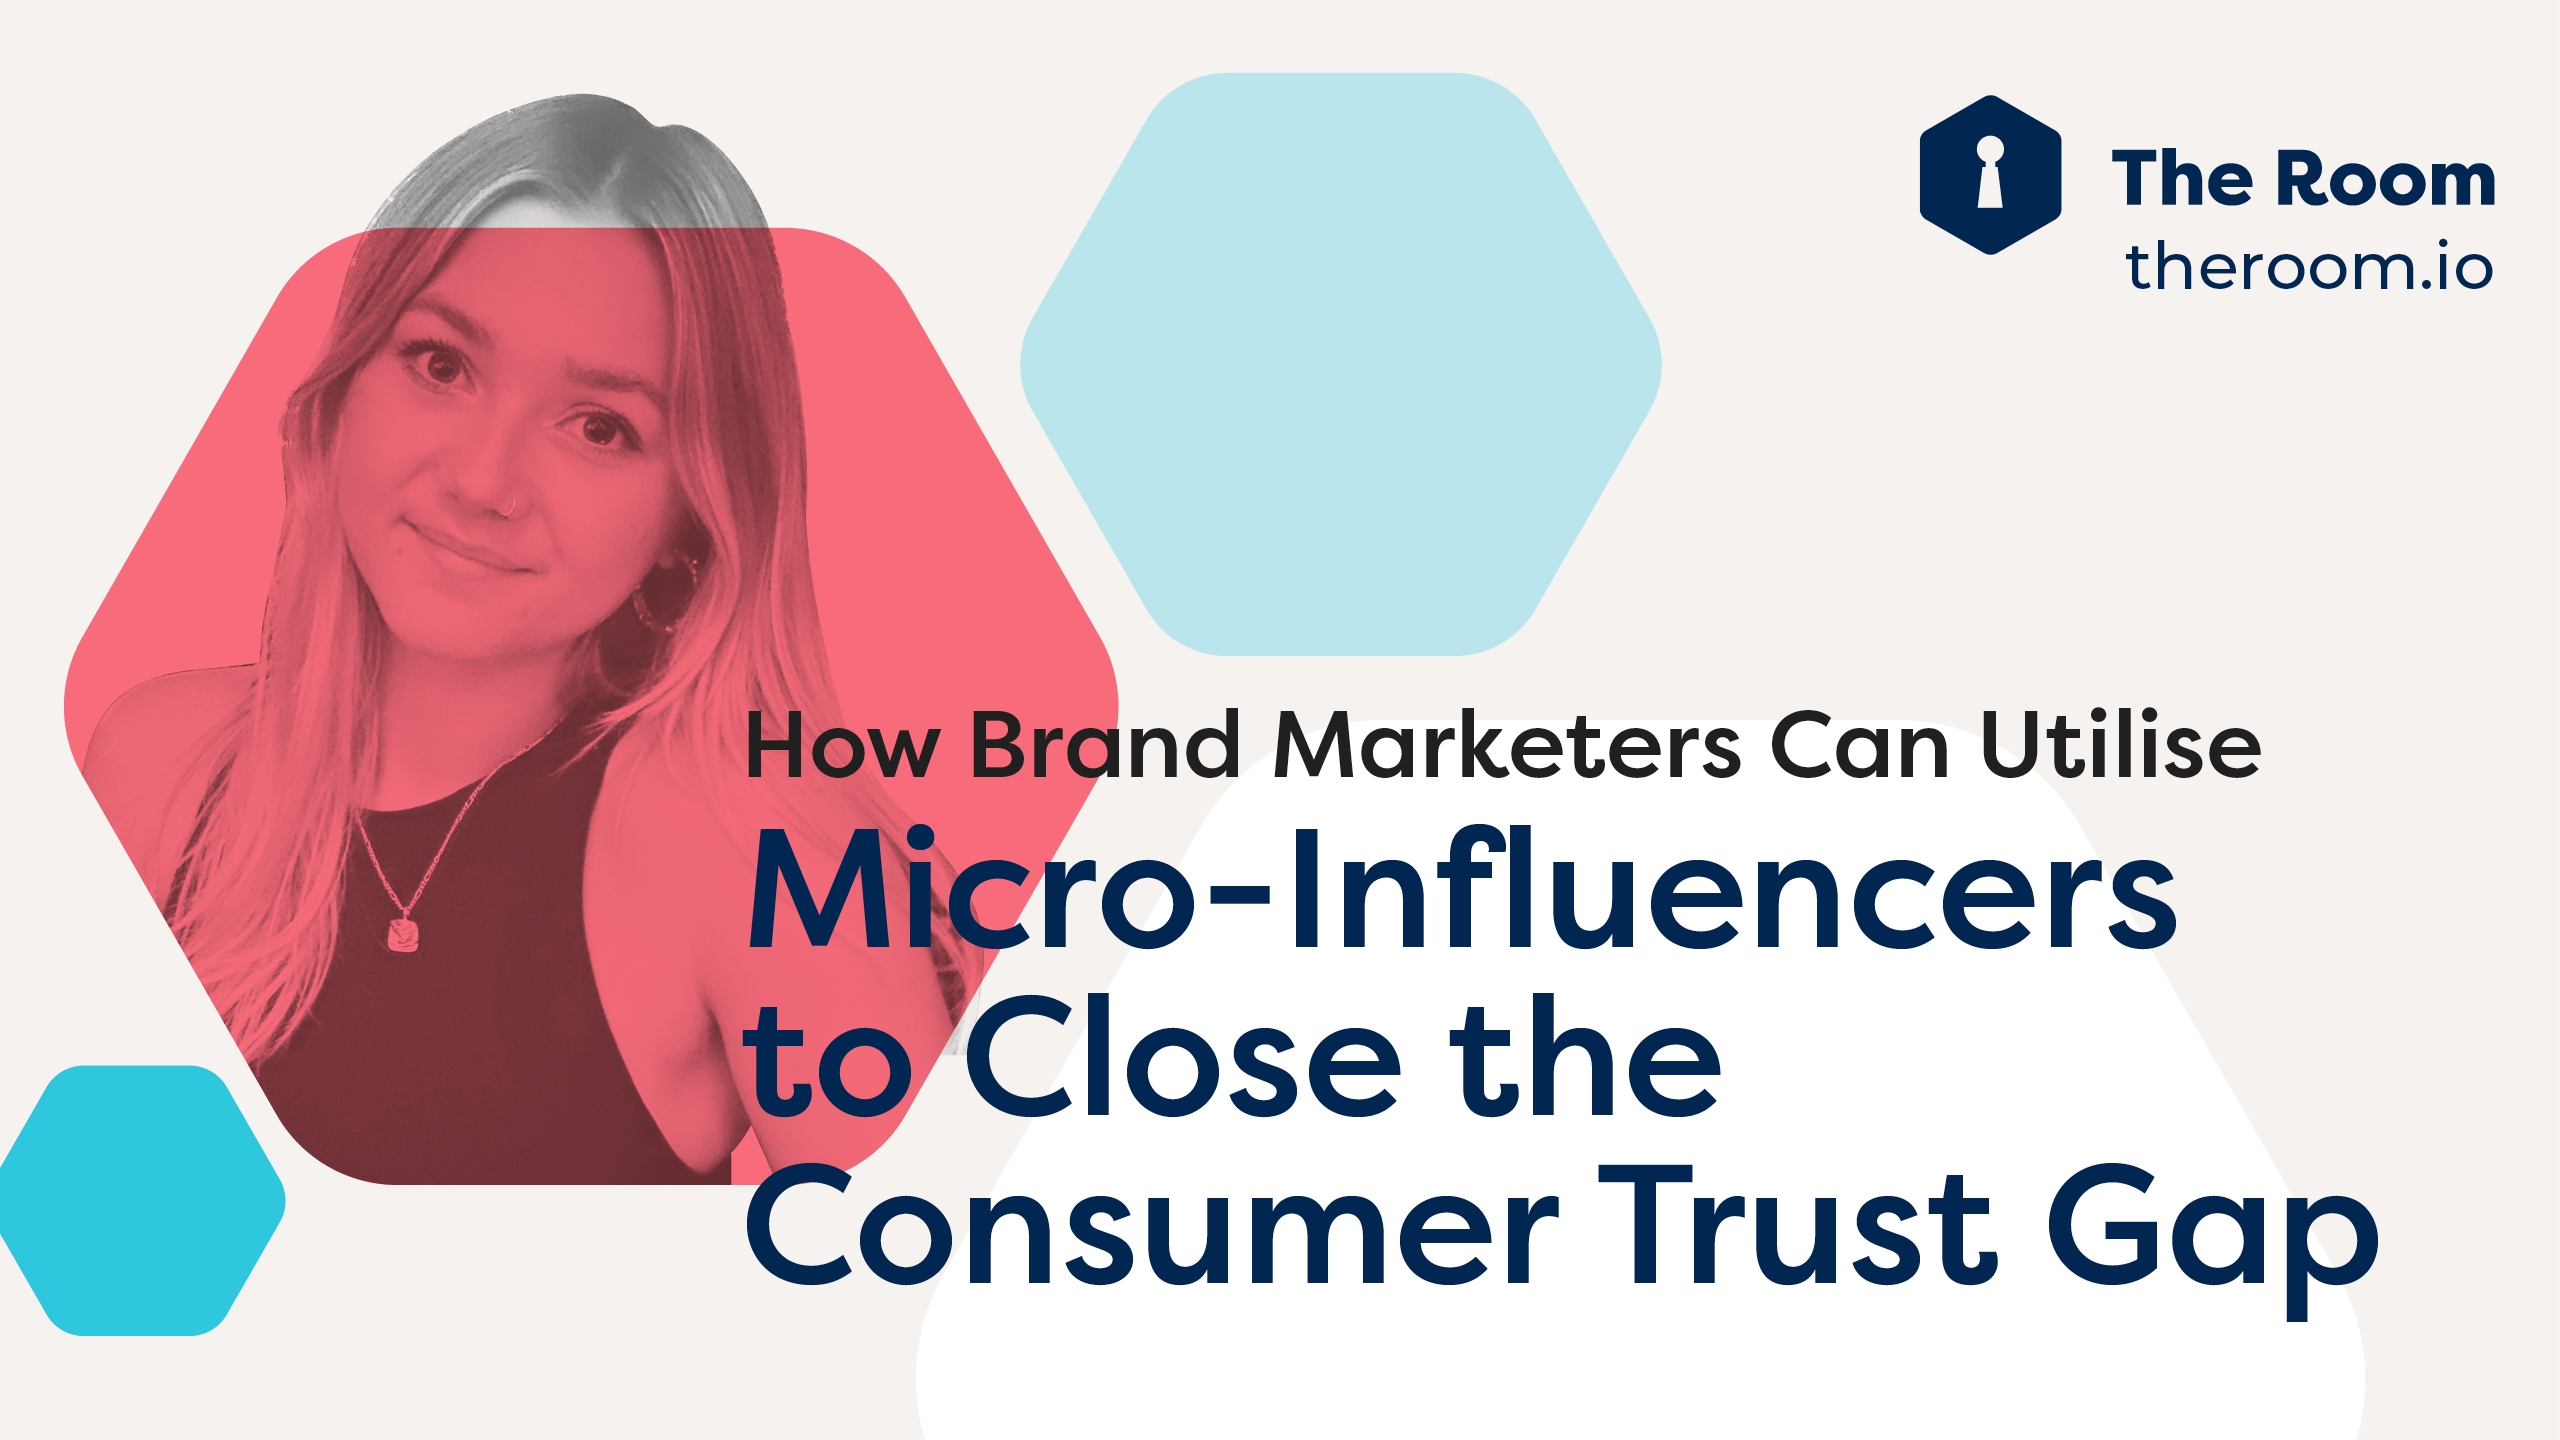 How Brand Marketers Can Utilise Micro-Influencers to Close the Consumer Trust Gap